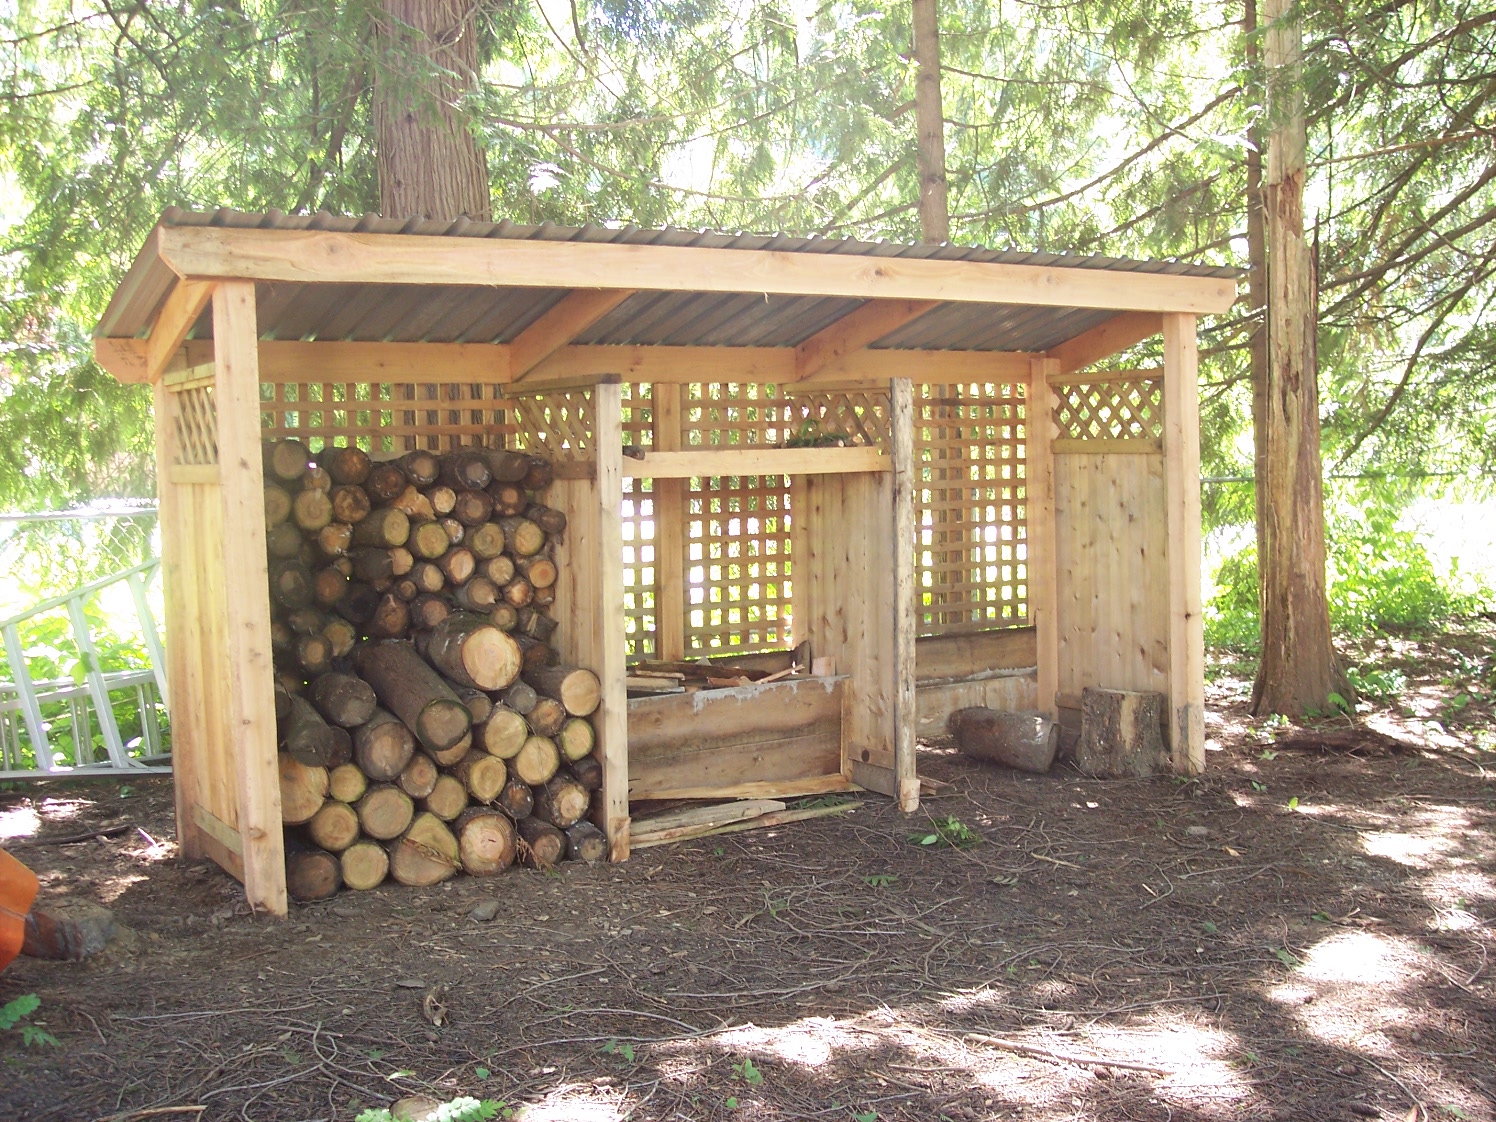 Now Eol: Building a wood shed